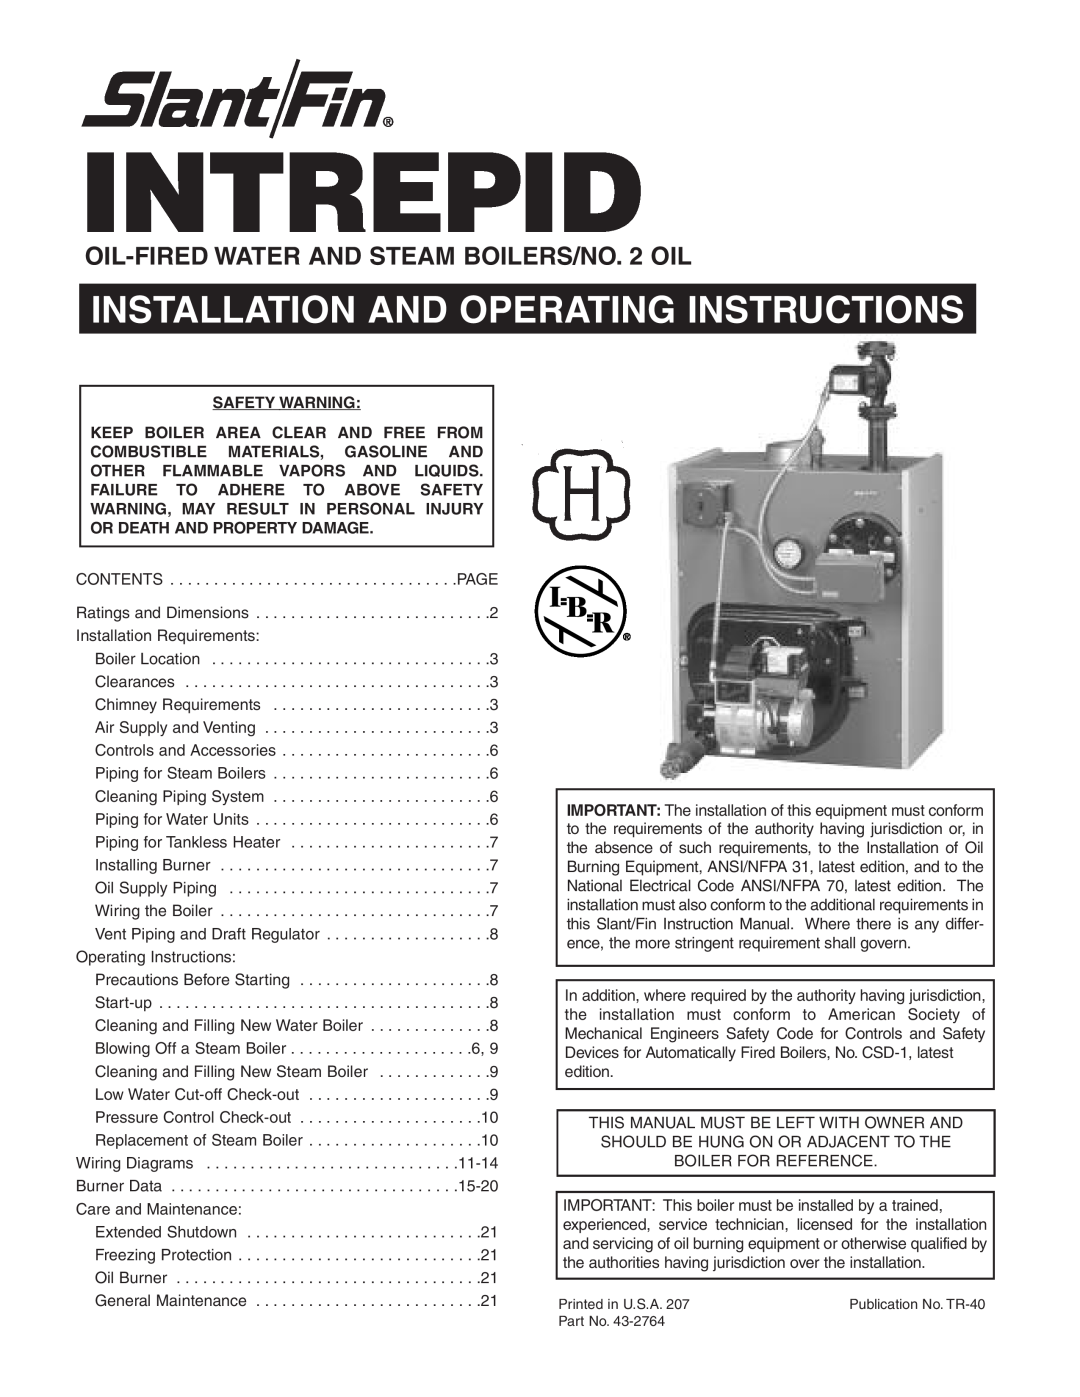 Slant/Fin Oil-fired Boiler dimensions Intrepid, Installation And Operating Instructions, Safety Warning 